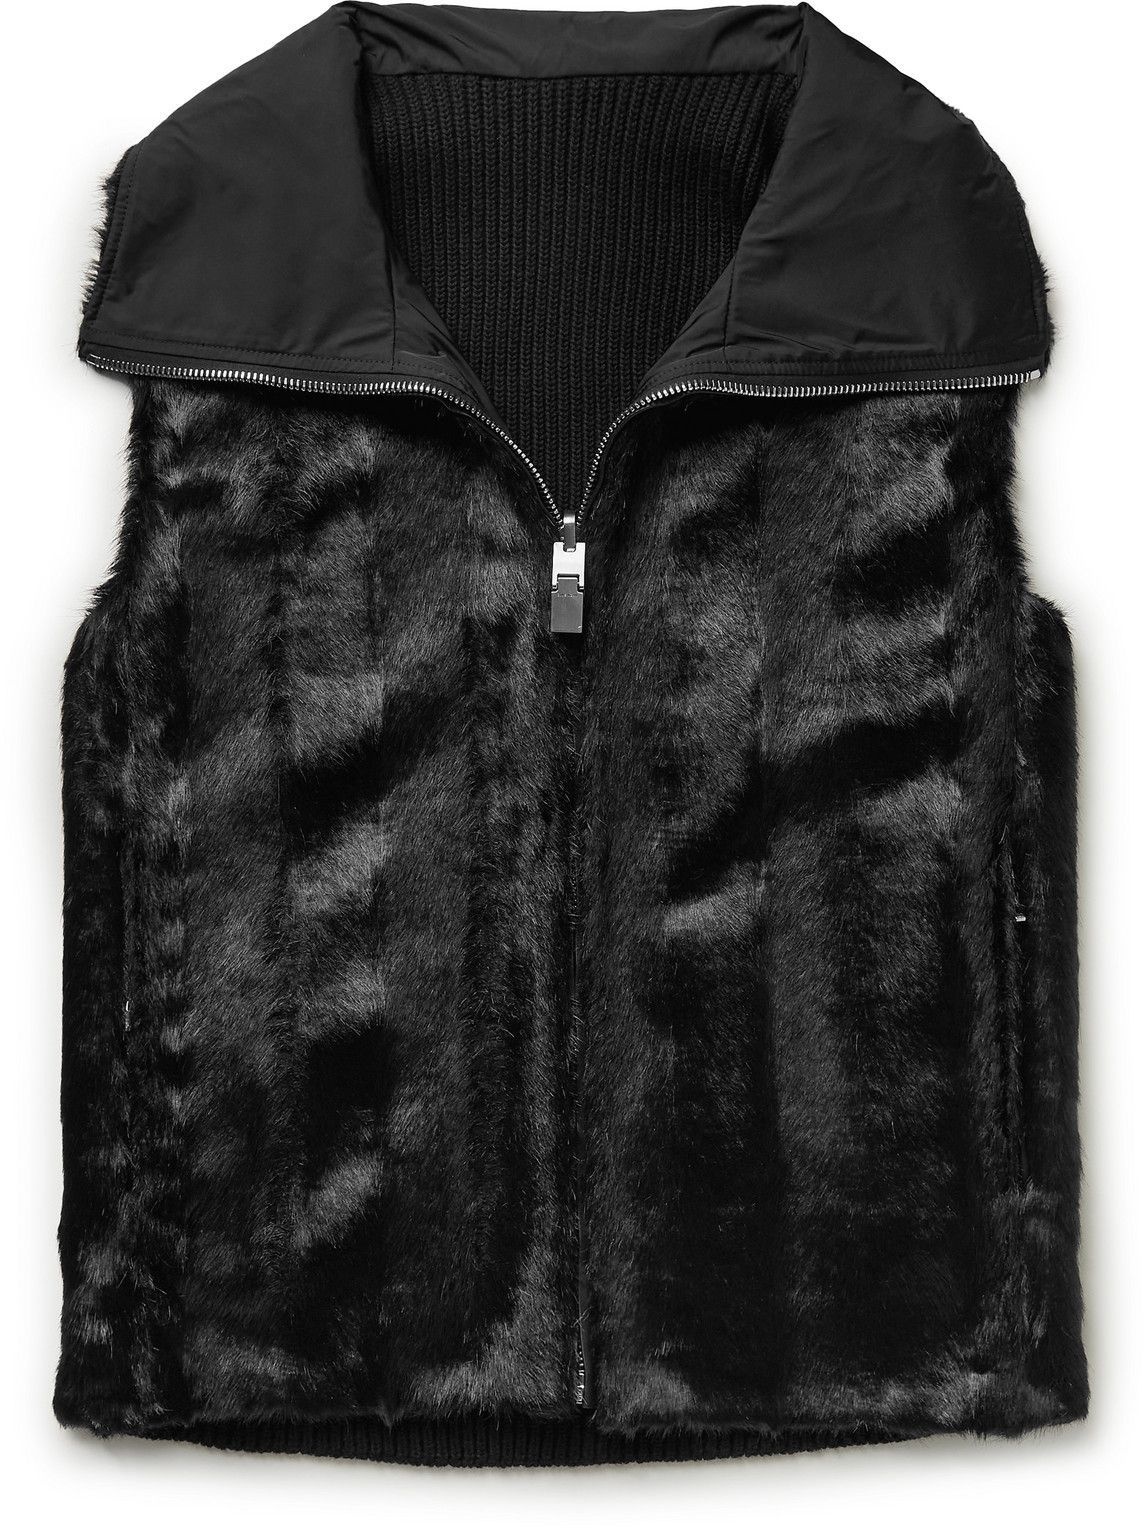 Givenchy - Reversible Faux Fur and Ribbed Wool Gilet - Black Givenchy